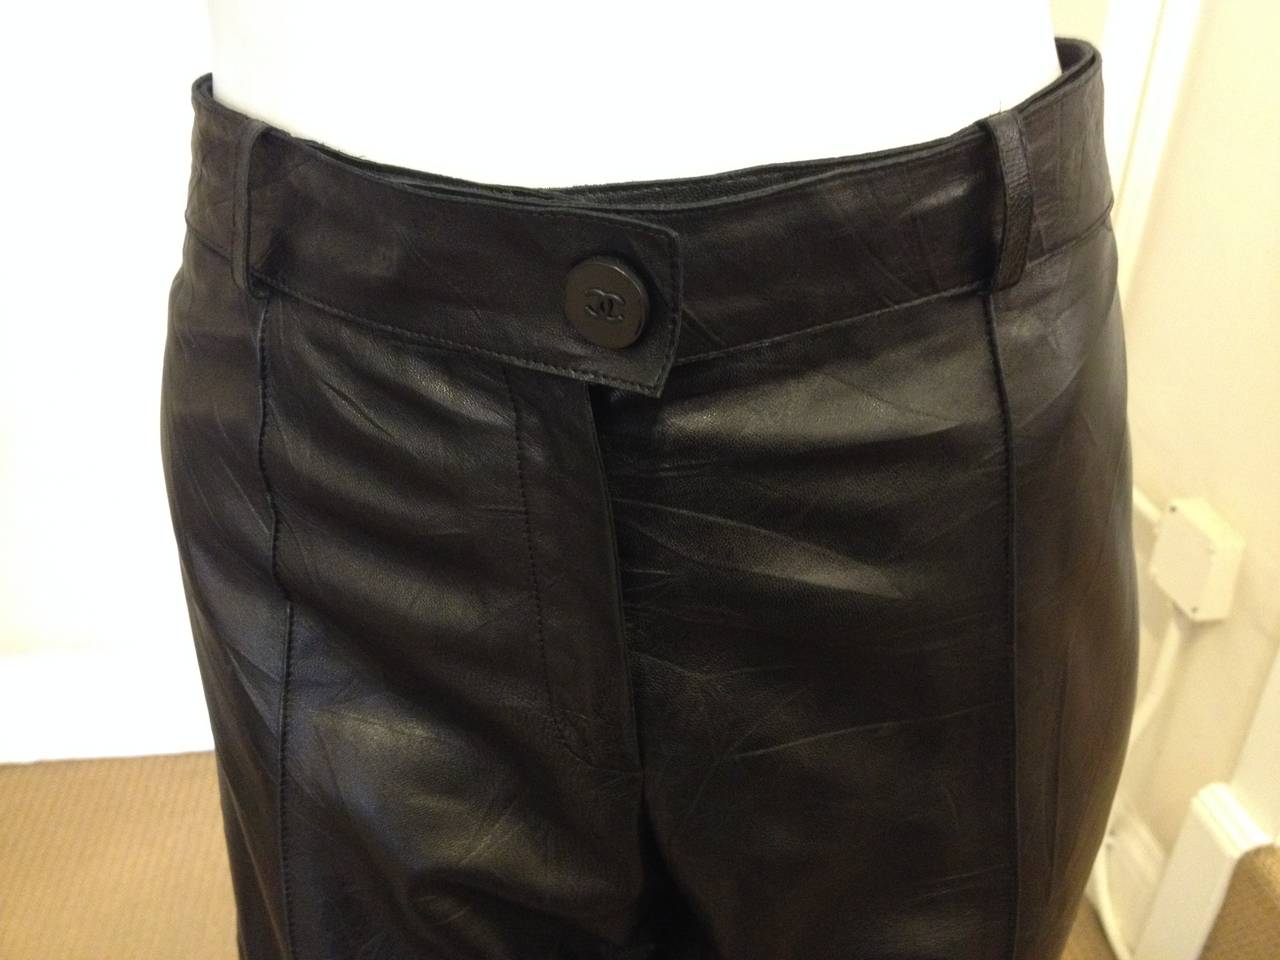 What could be more fabulous than a pair of Chanel leather pants - the foil to their feminine and classic tweed jackets. A pair of leather pants always has an element of cool and easy style, and especially these with their subtle texture of all-over